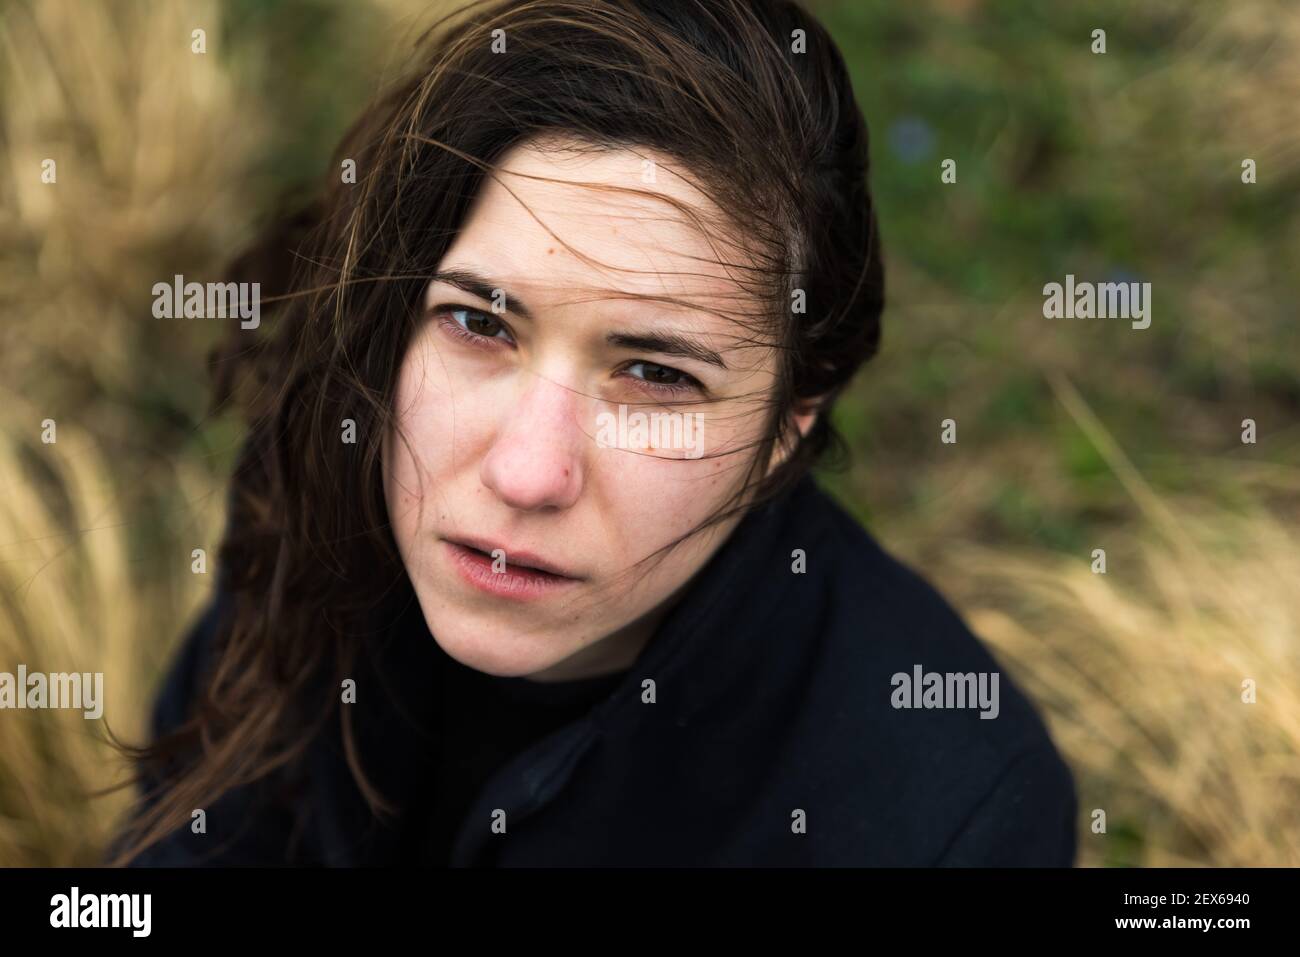 Outdoors portrait from above of a 28 year old white woman with brown hair and a nature background Stock Photo